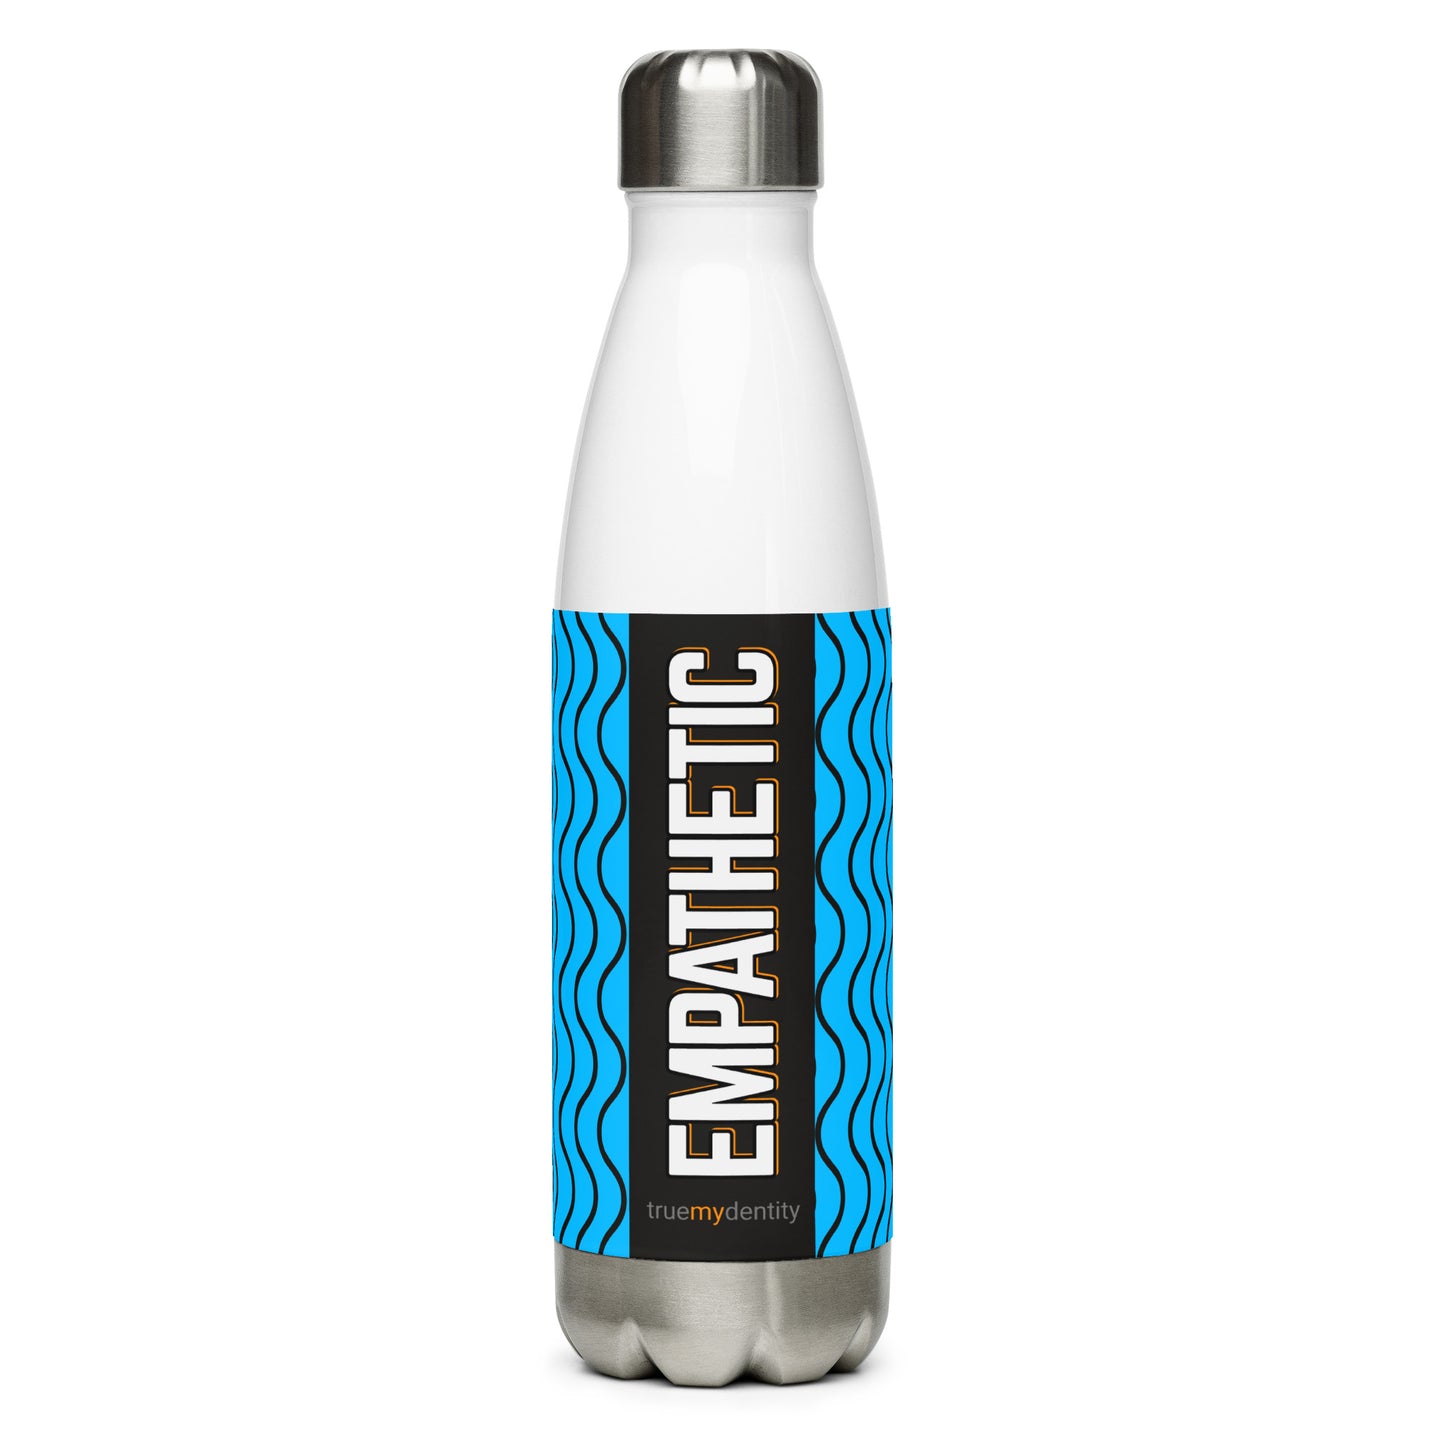 EMPATHETIC Stainless Steel Water Bottle Blue Wave Design, 17 oz, in Black or White